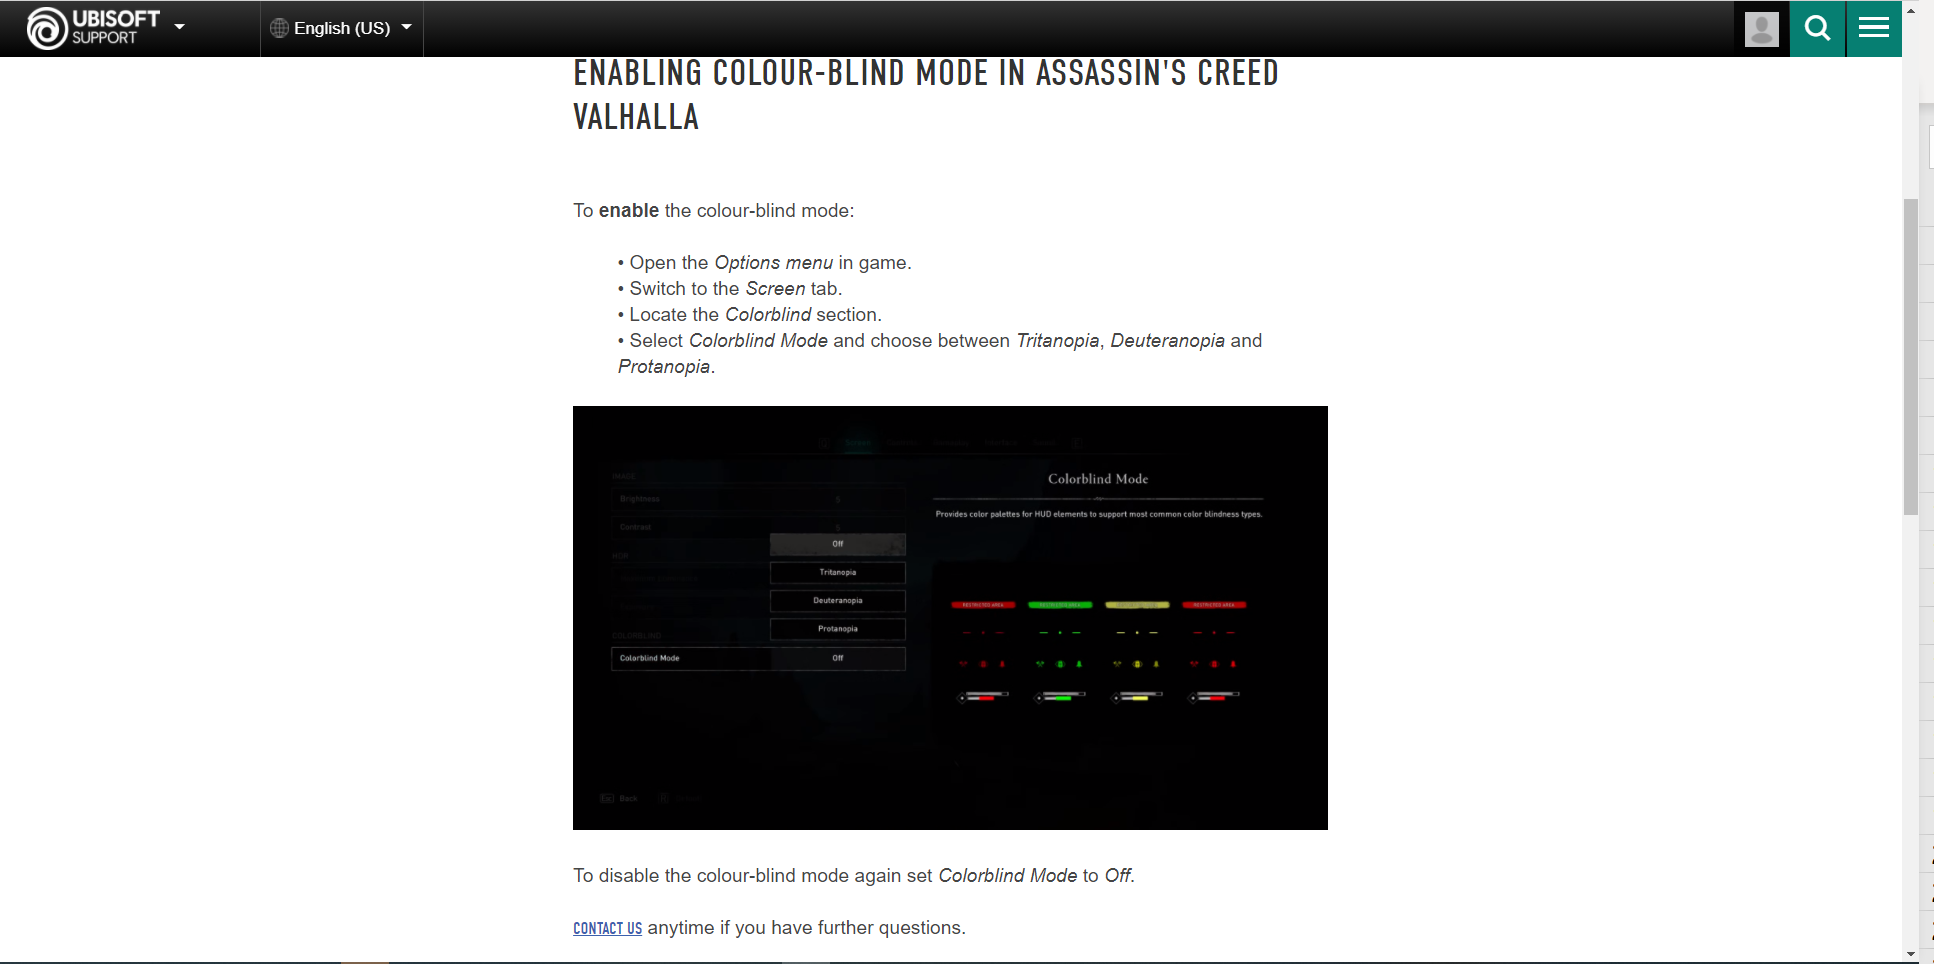 A screenshot of detailed information on colorblind accessibility features in Assassin's Creed Valhalla on the Ubisoft website.